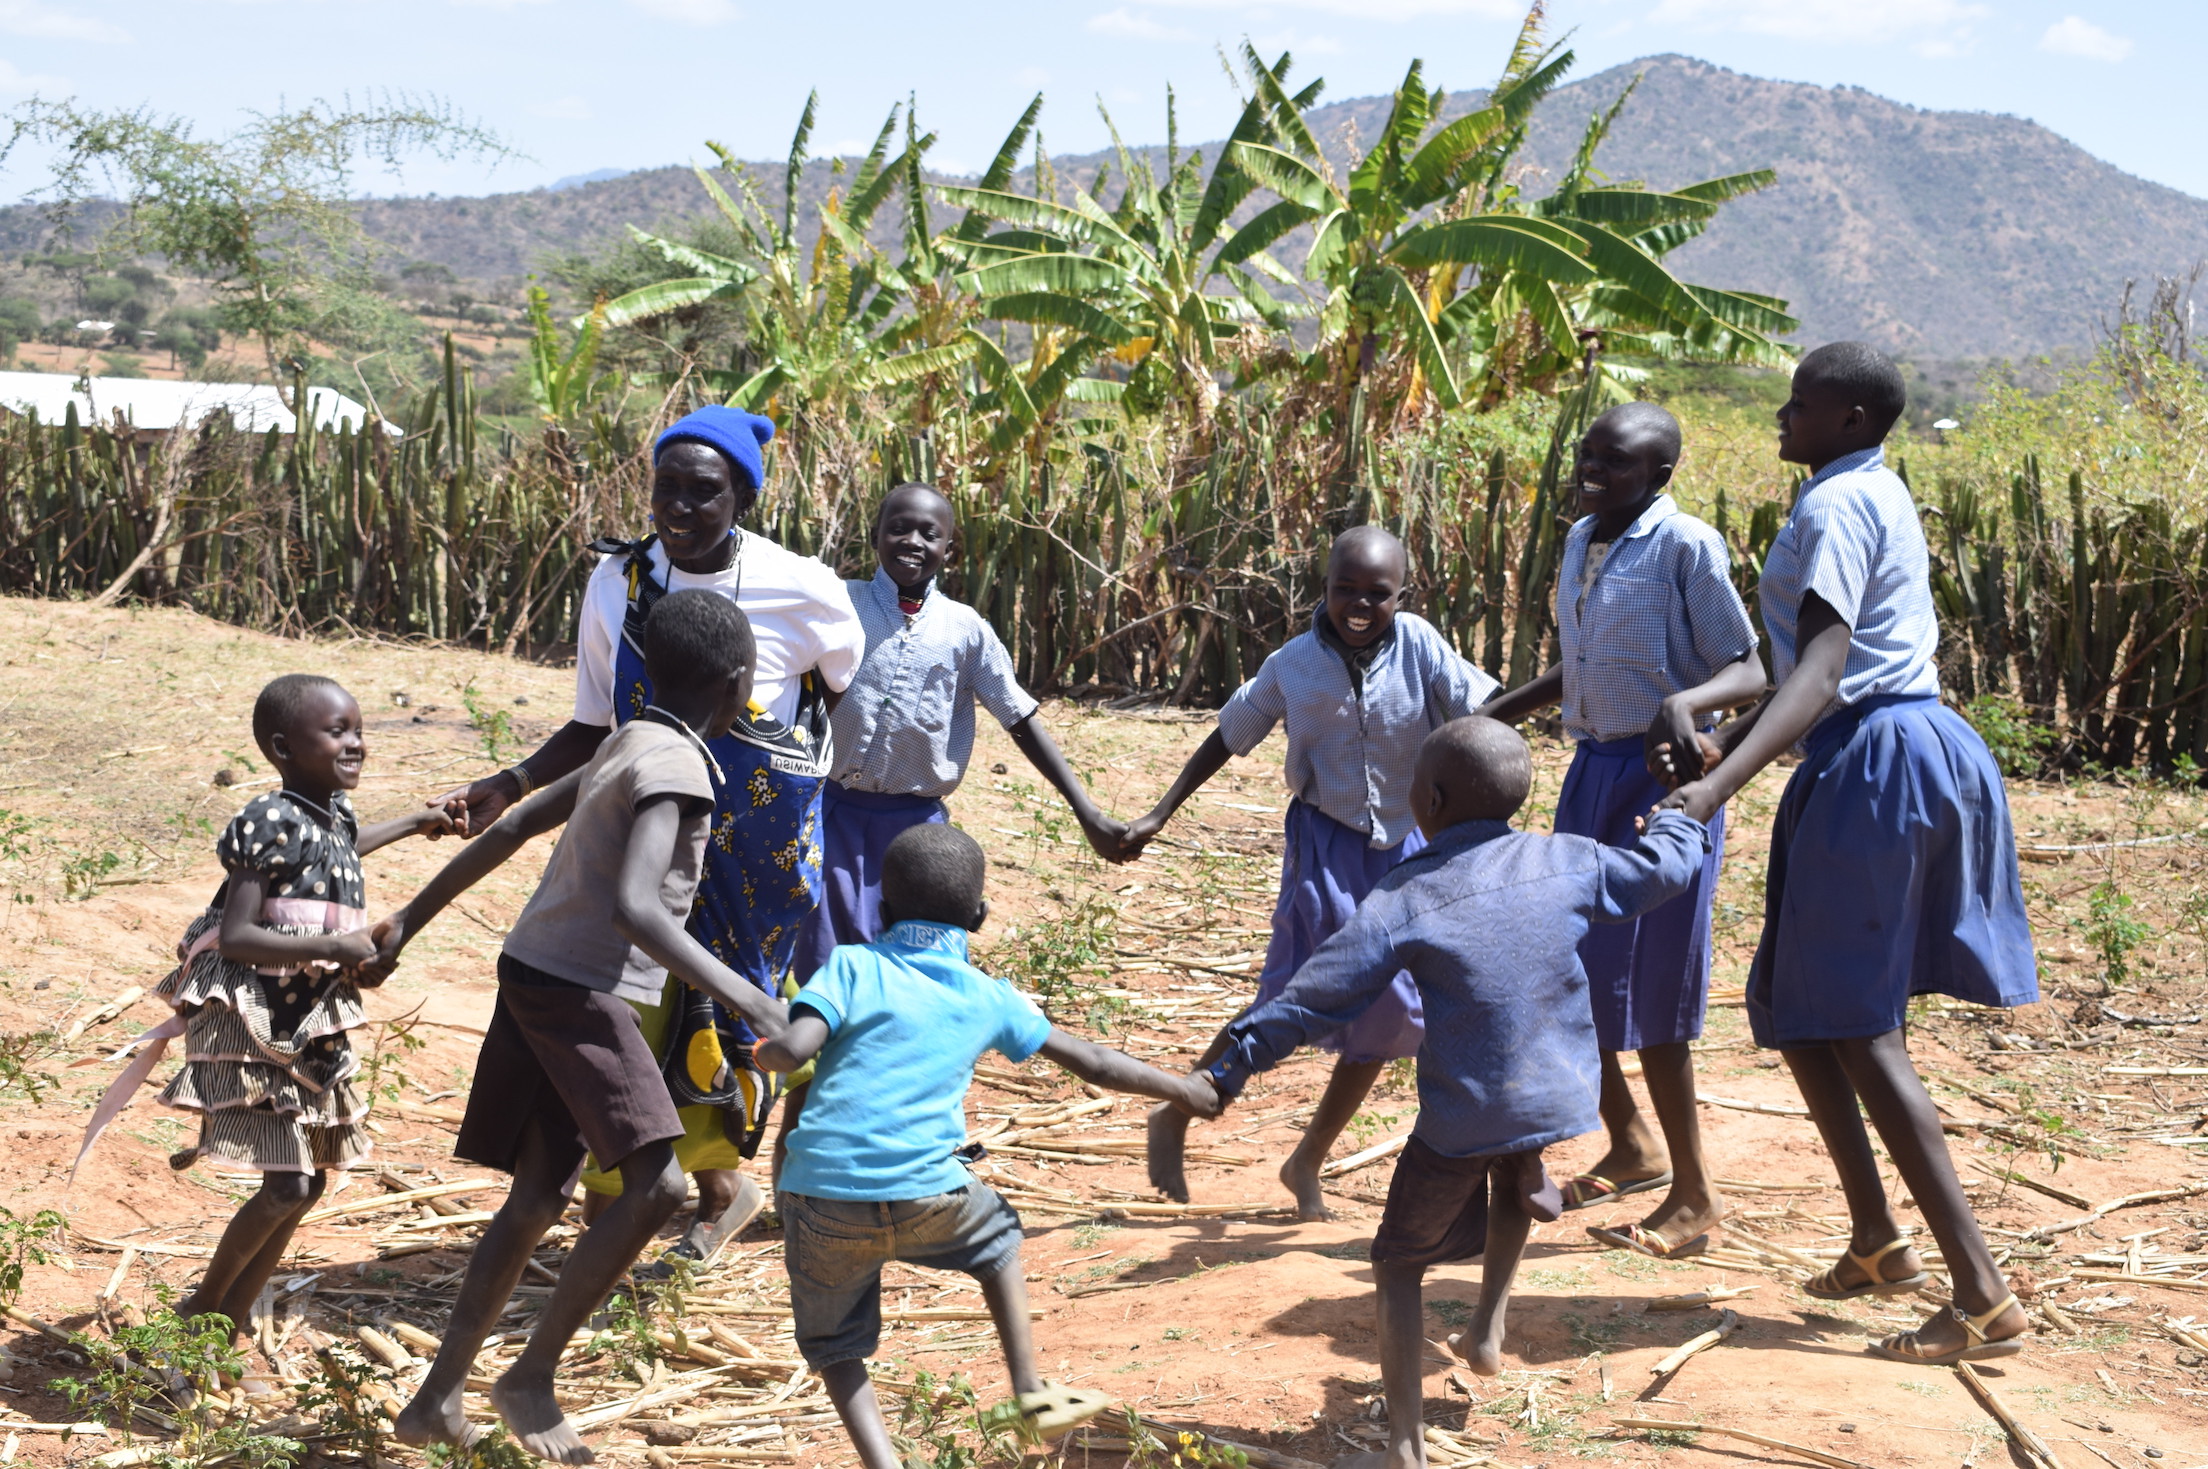 Chepurai playing with her grandchildren at Sook in Kenya's West Pokot County. She has protected them from FGM. ©World Vision/Photo by Sarah Ooko.